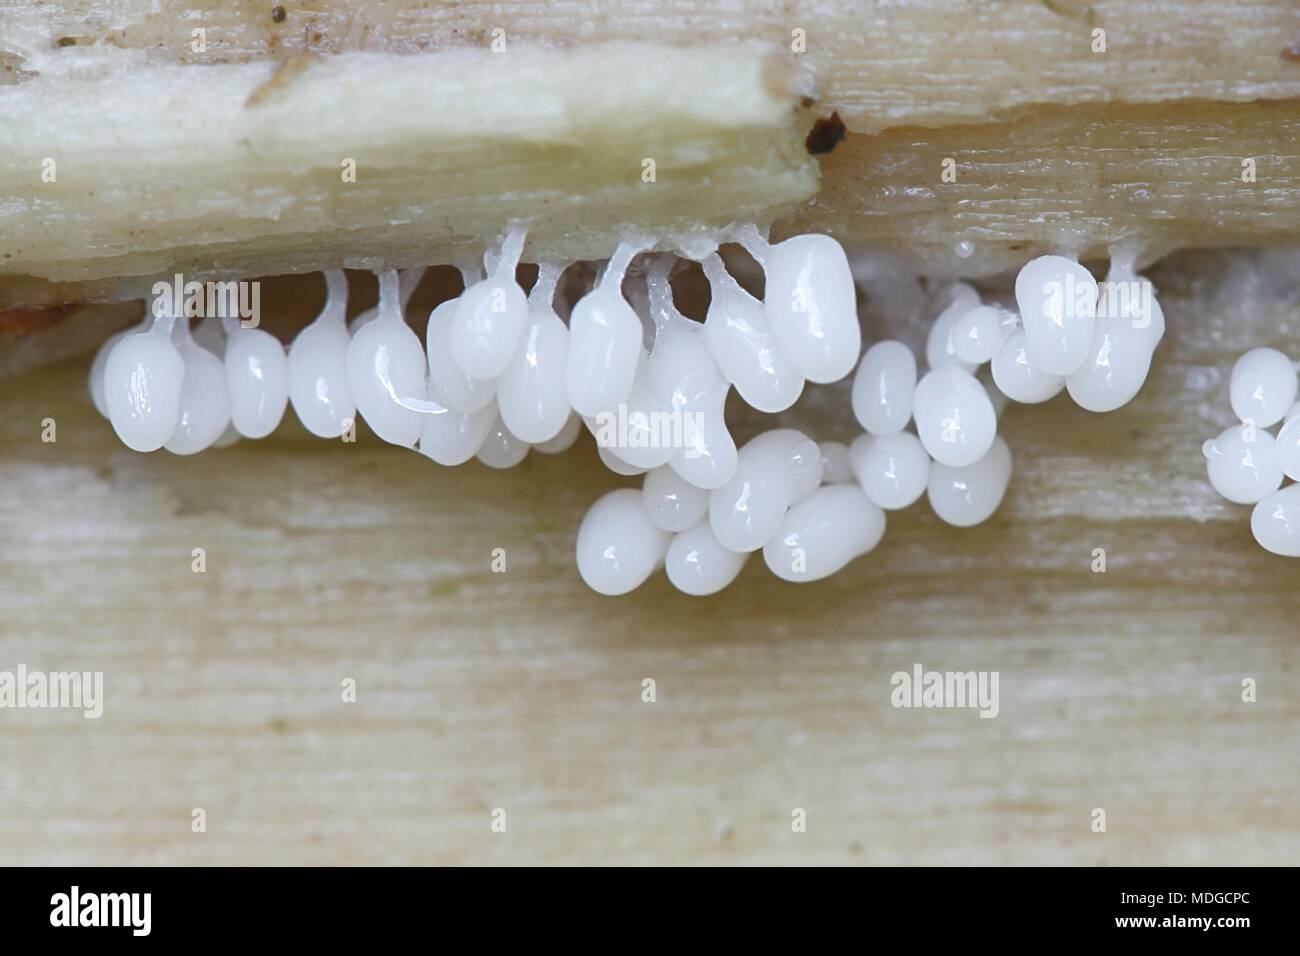 Candy slime mold, Arcyria sp, maturing early development phase Stock Photo